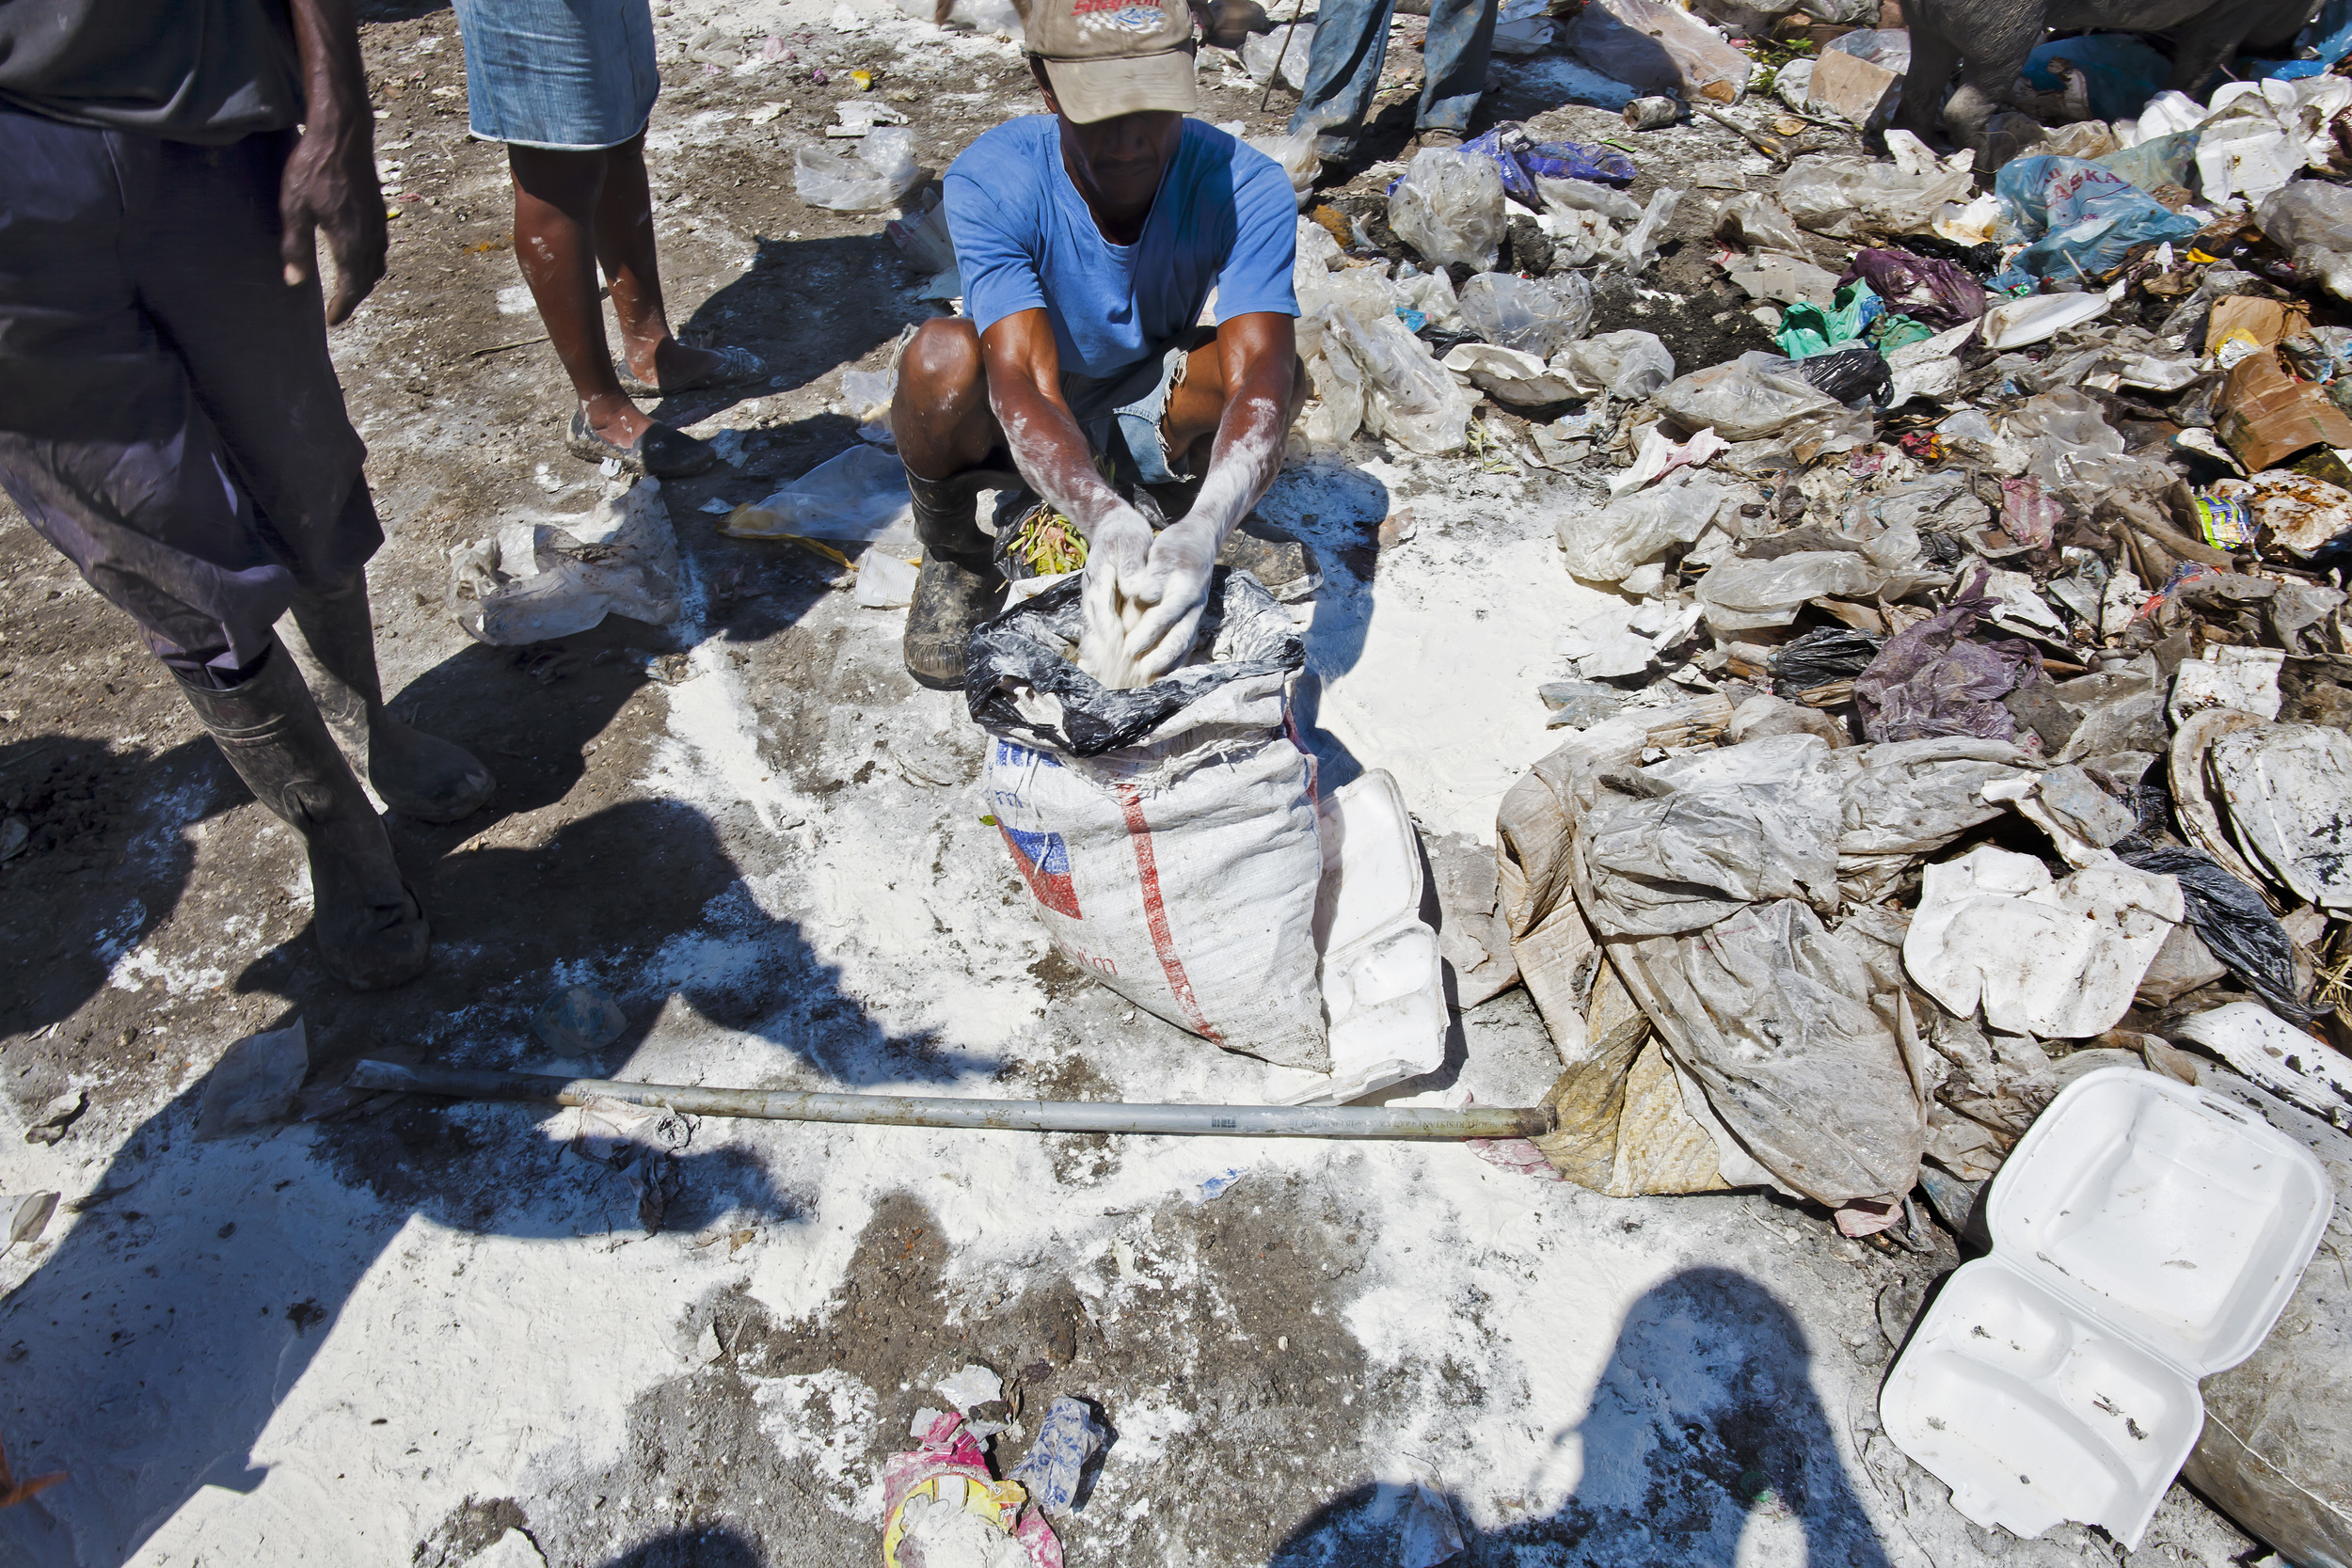 Man scoops up flour in a landfill